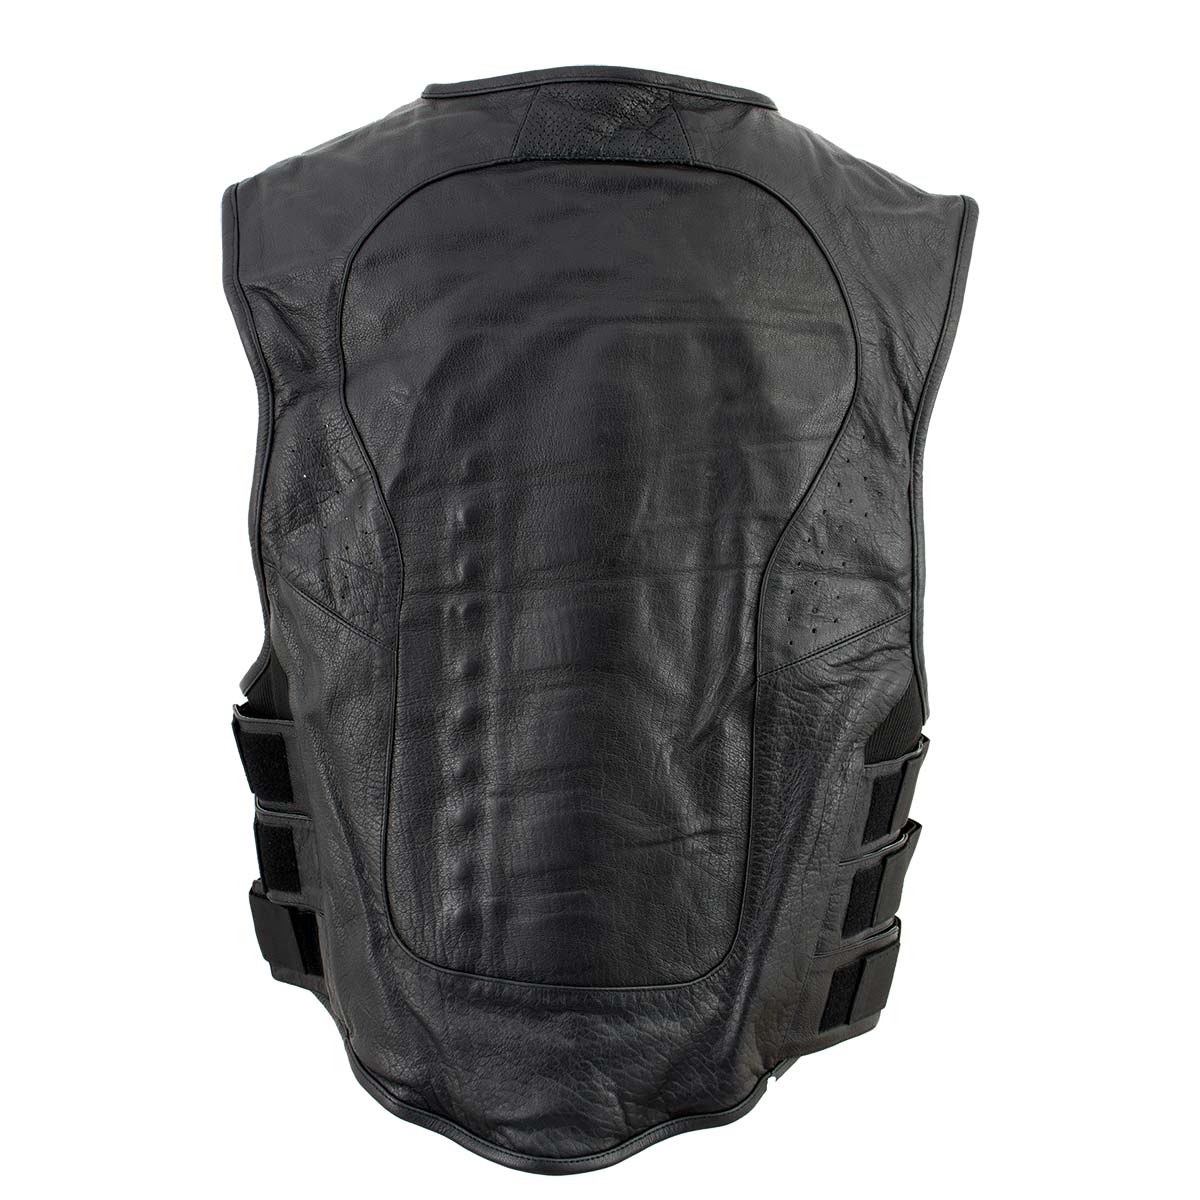 Leather King XSM1467 Men's Classic Black Leather Vest with Back Armor